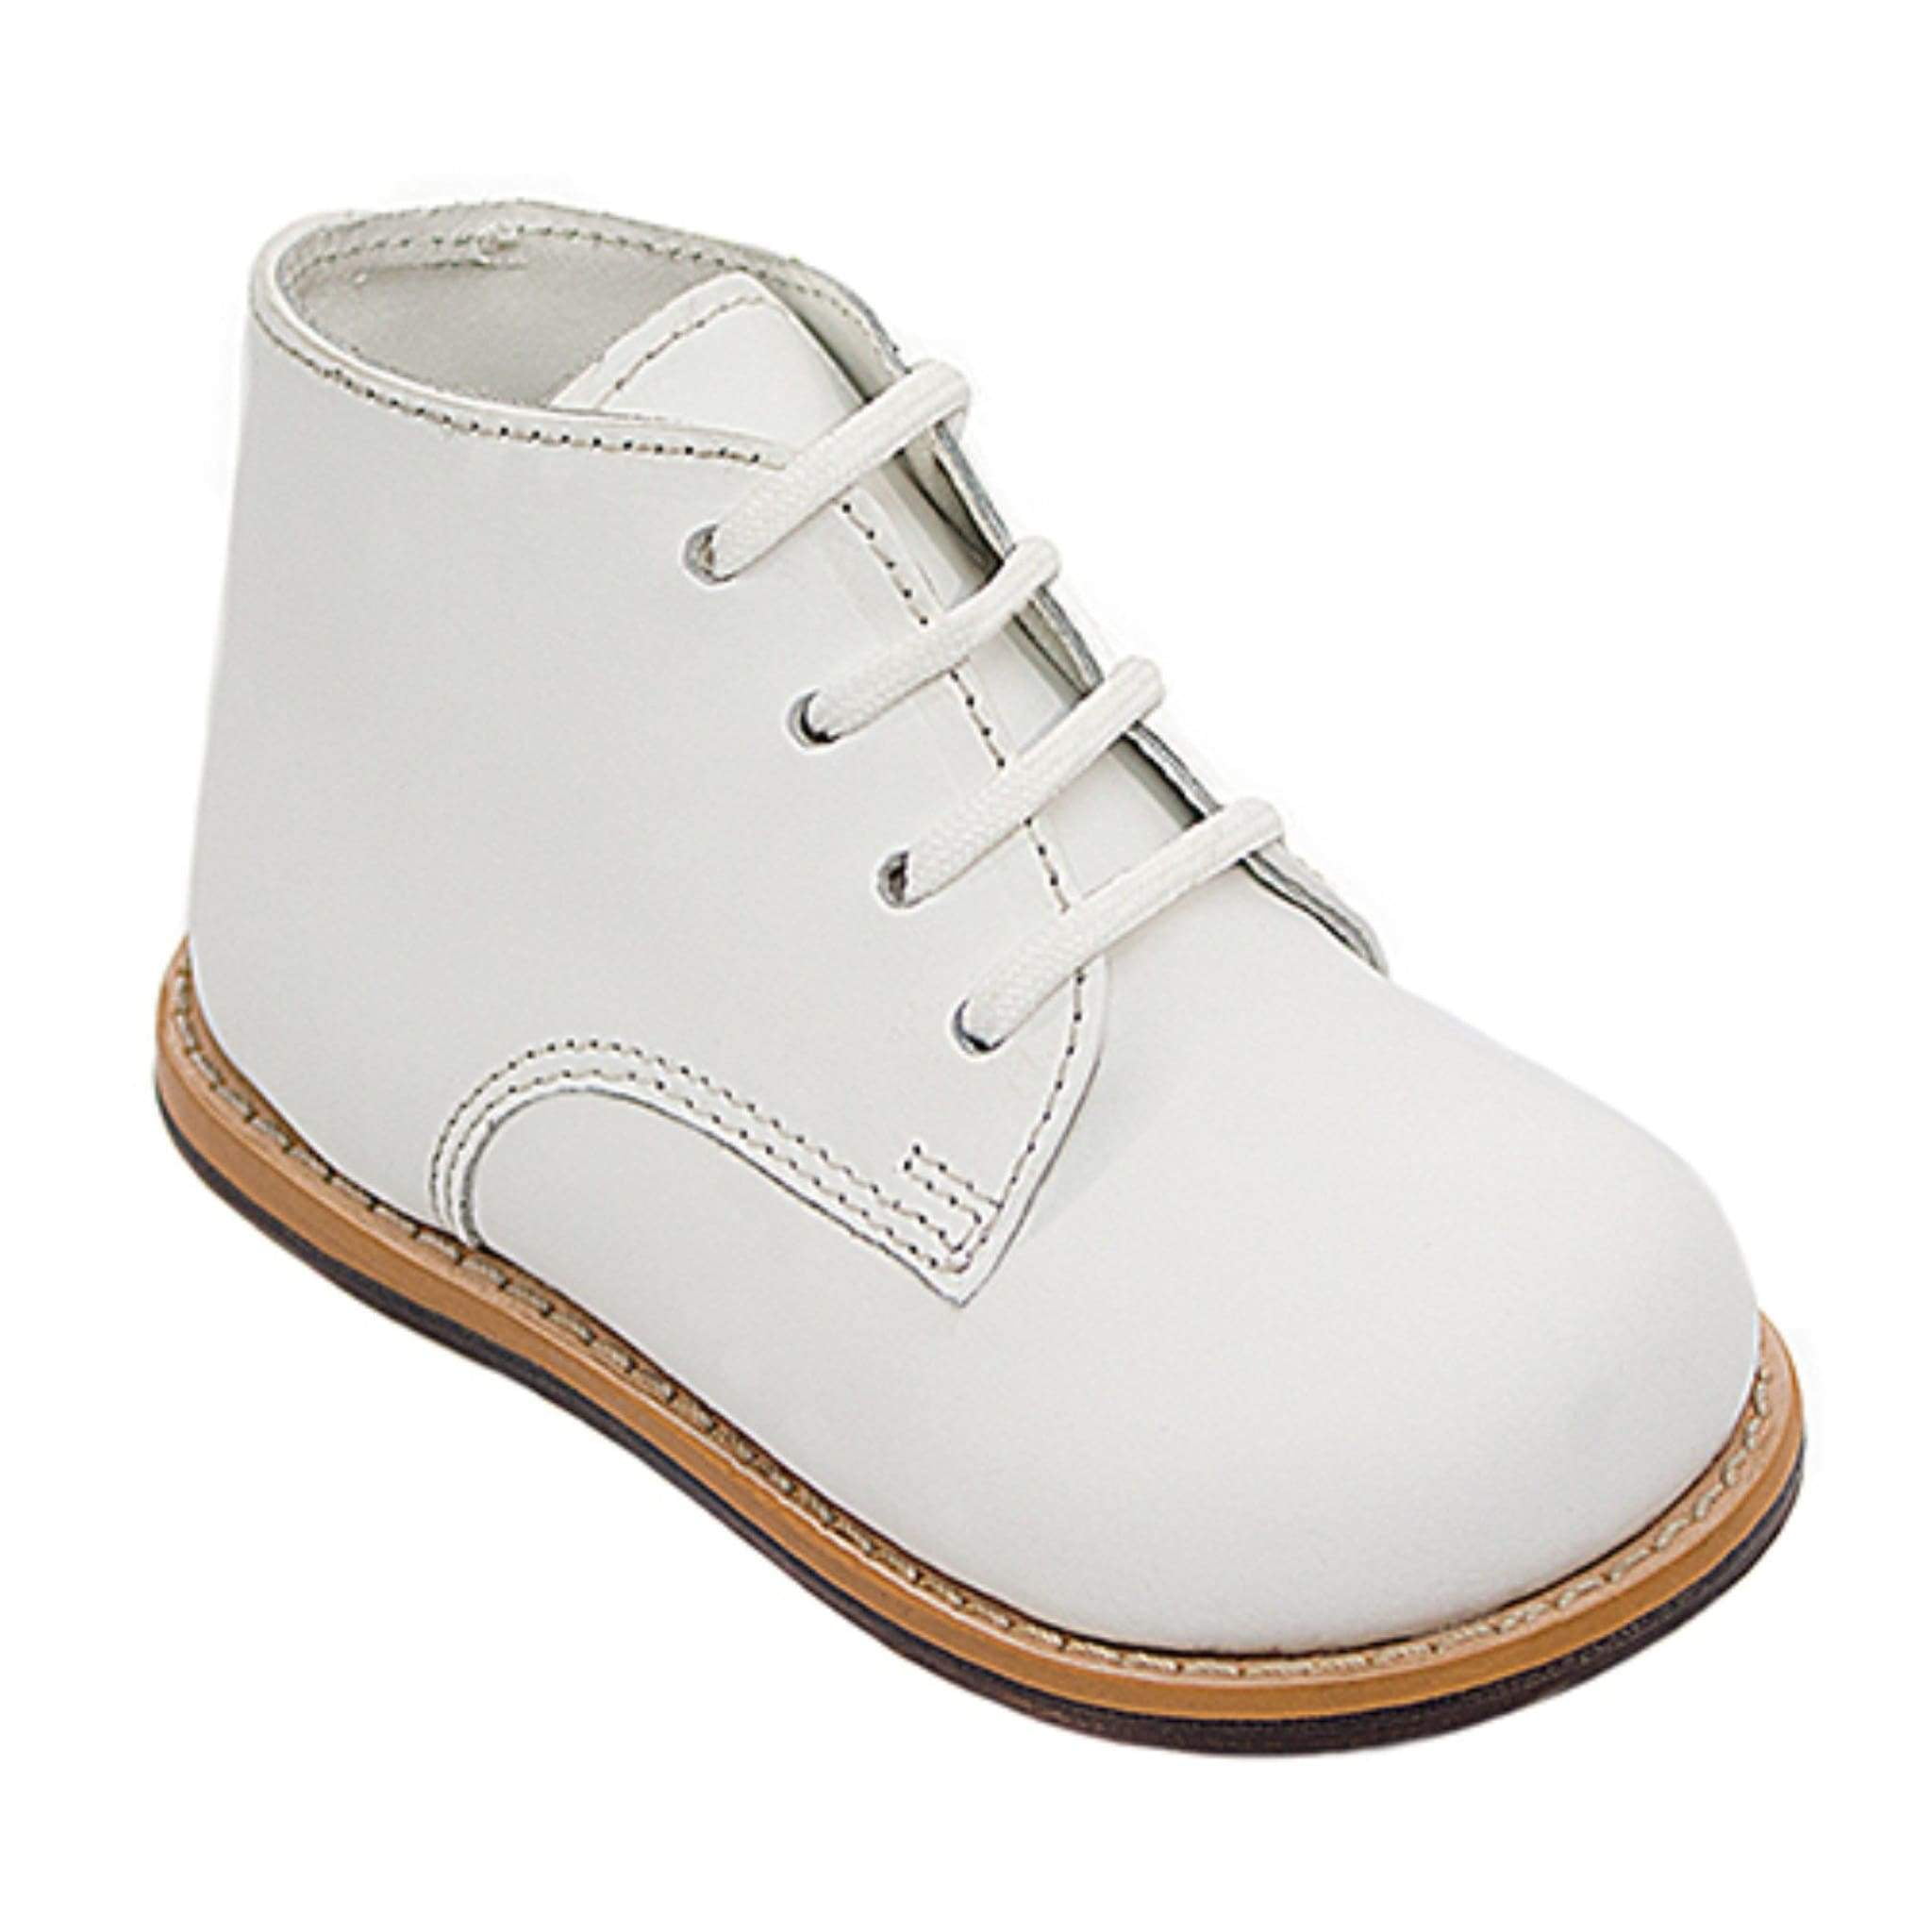 white high top walking shoes for babies